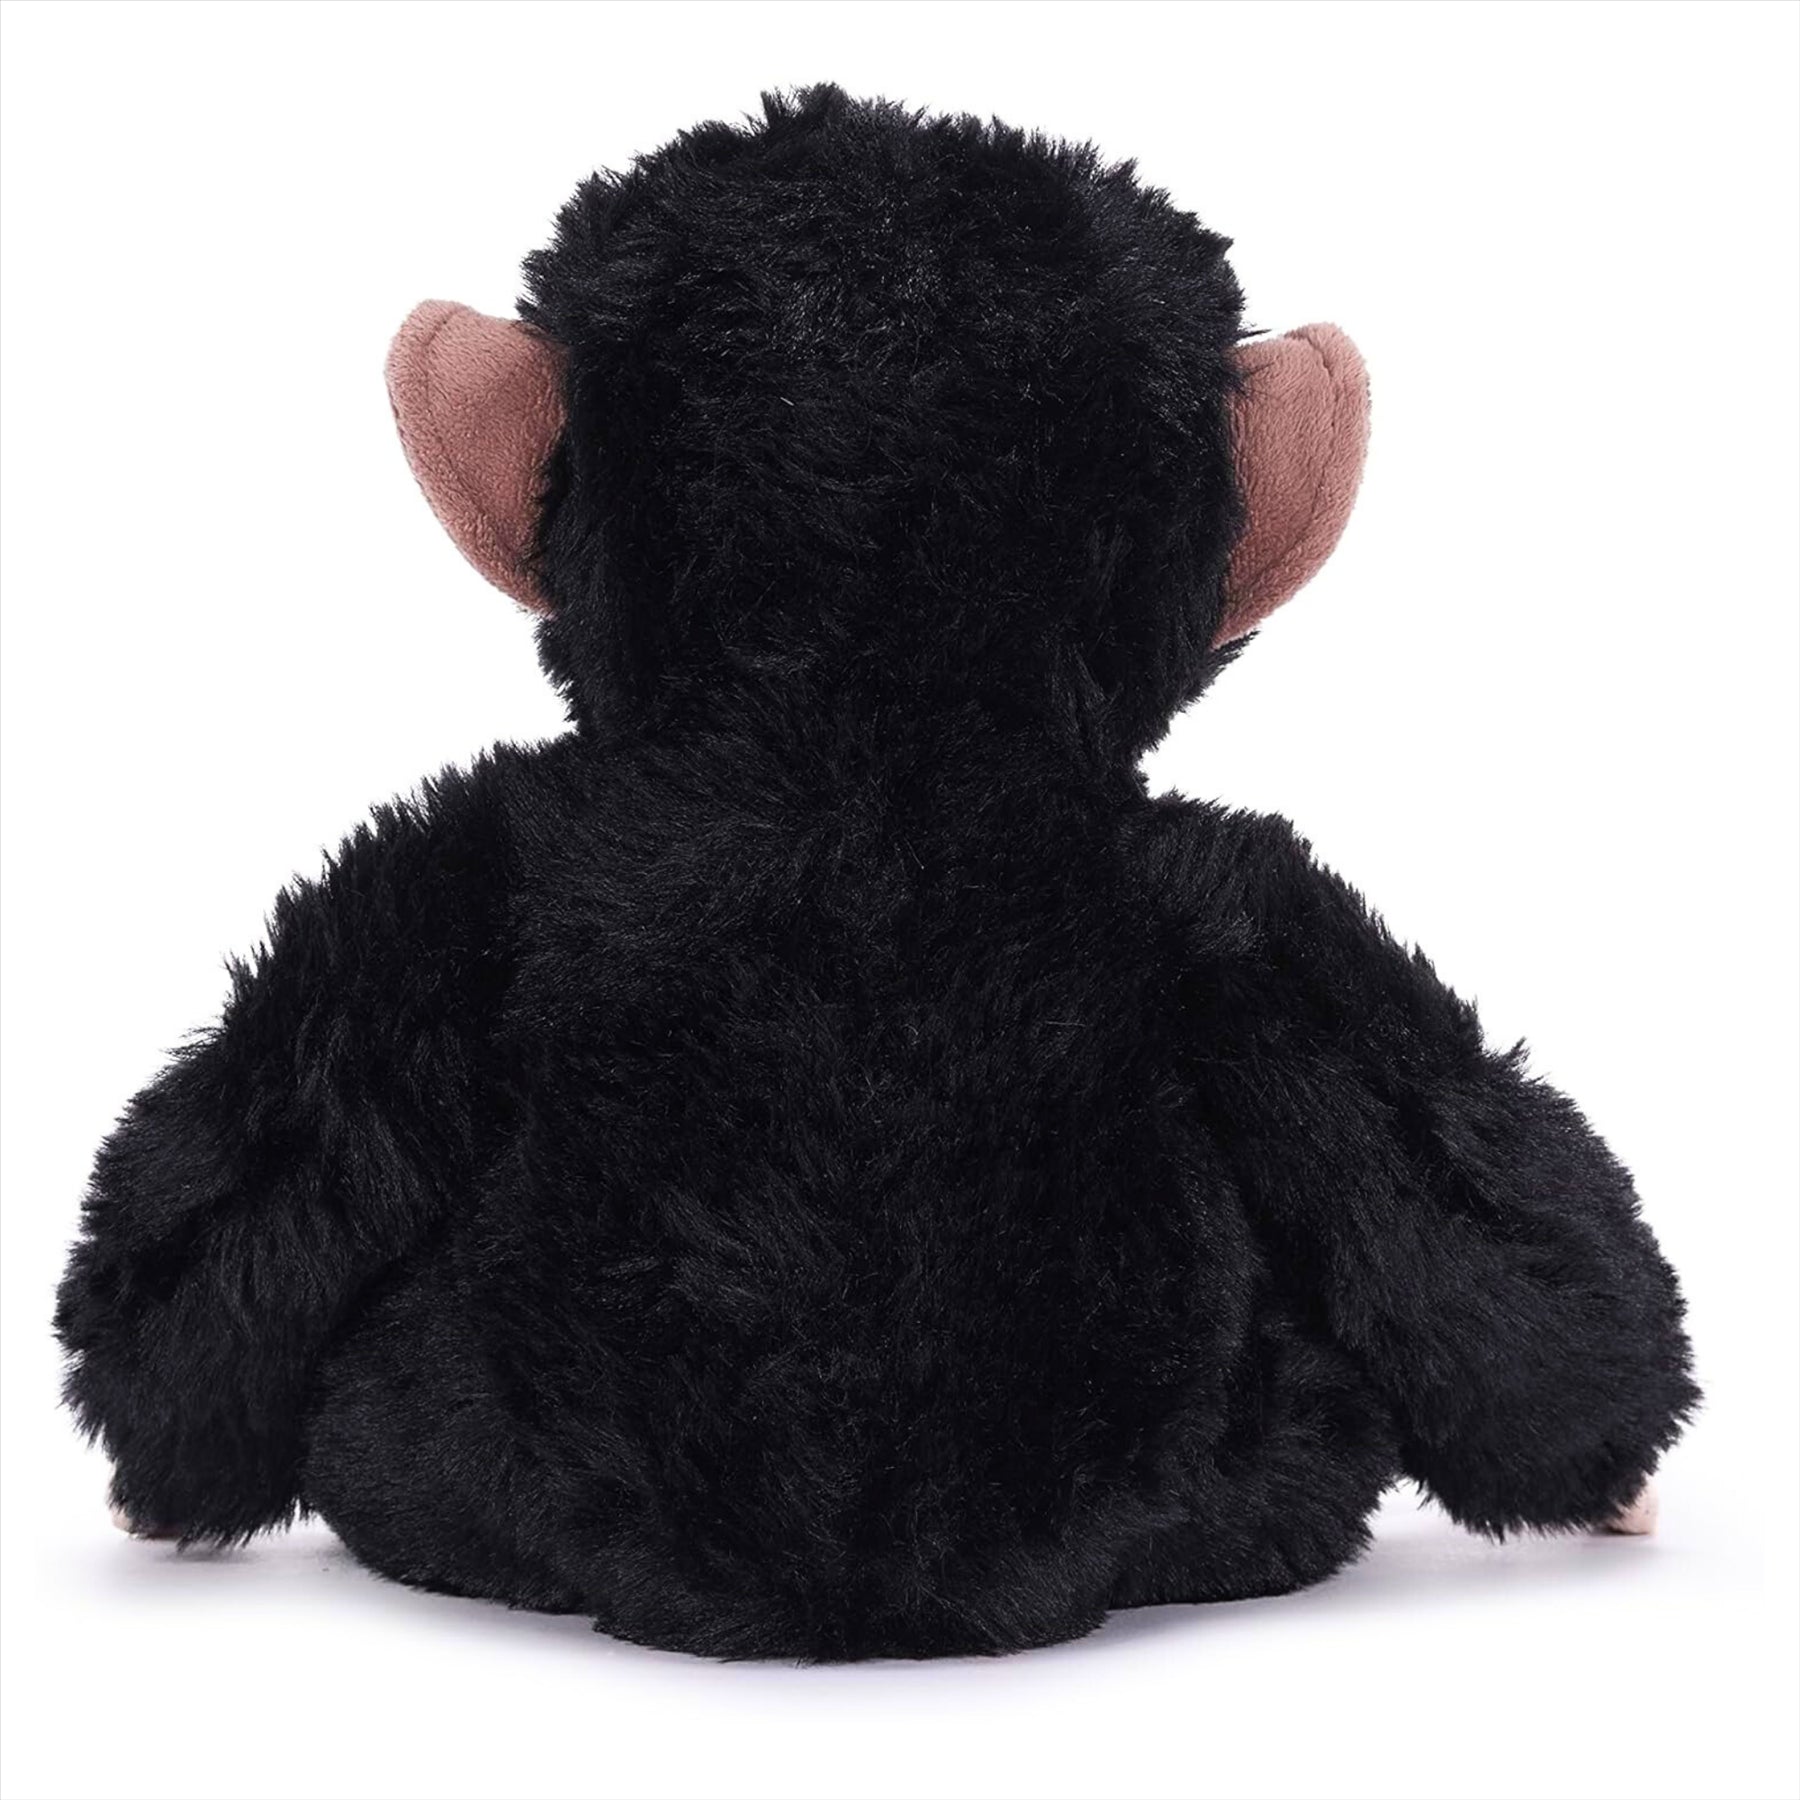 Posh Paws Out of Africa Animals Collection Monkey Super Soft Plush Toy 30cm 12" - Toptoys2u